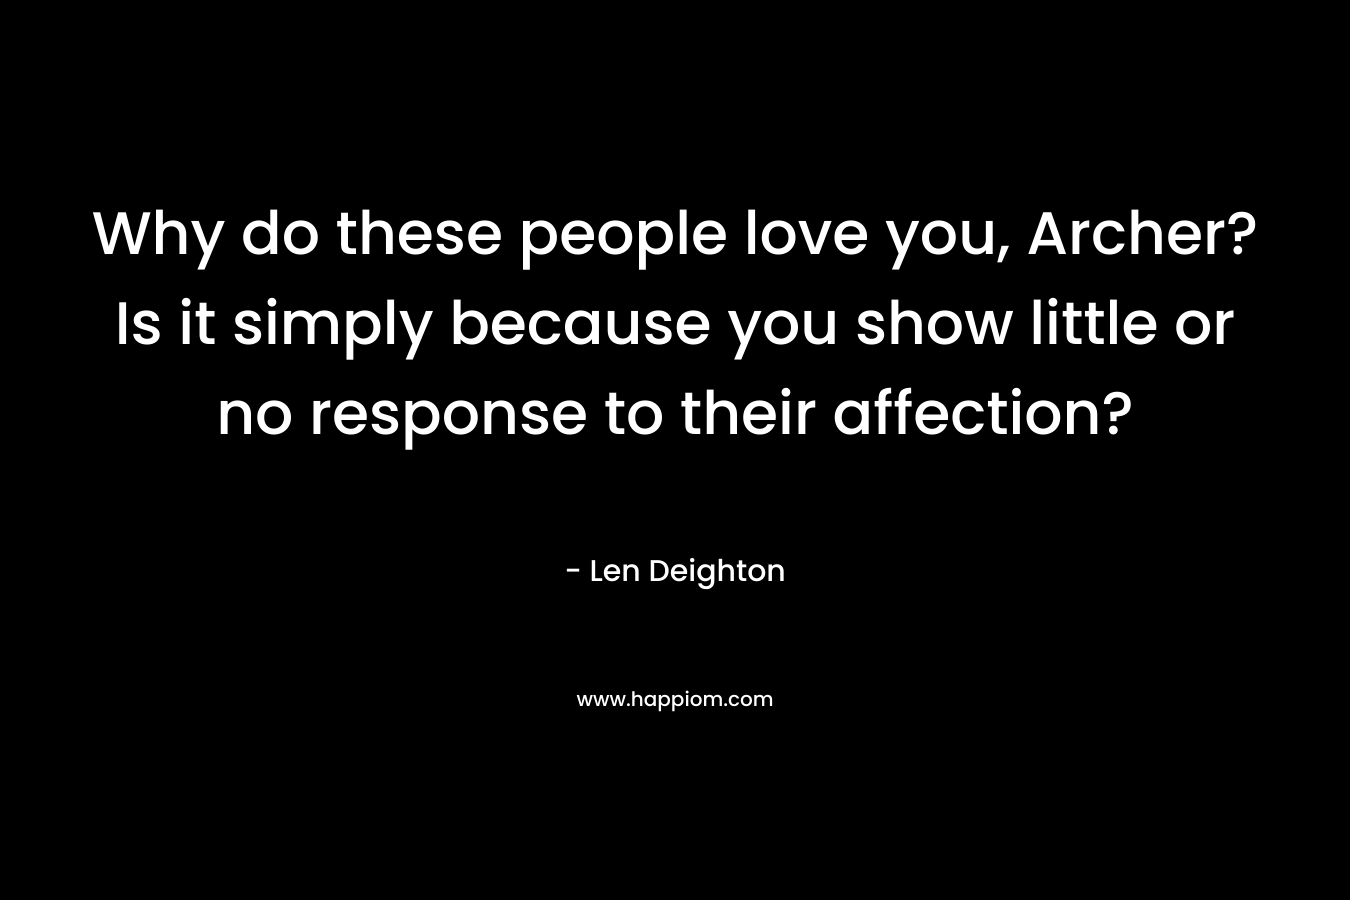 Why do these people love you, Archer? Is it simply because you show little or no response to their affection? – Len Deighton